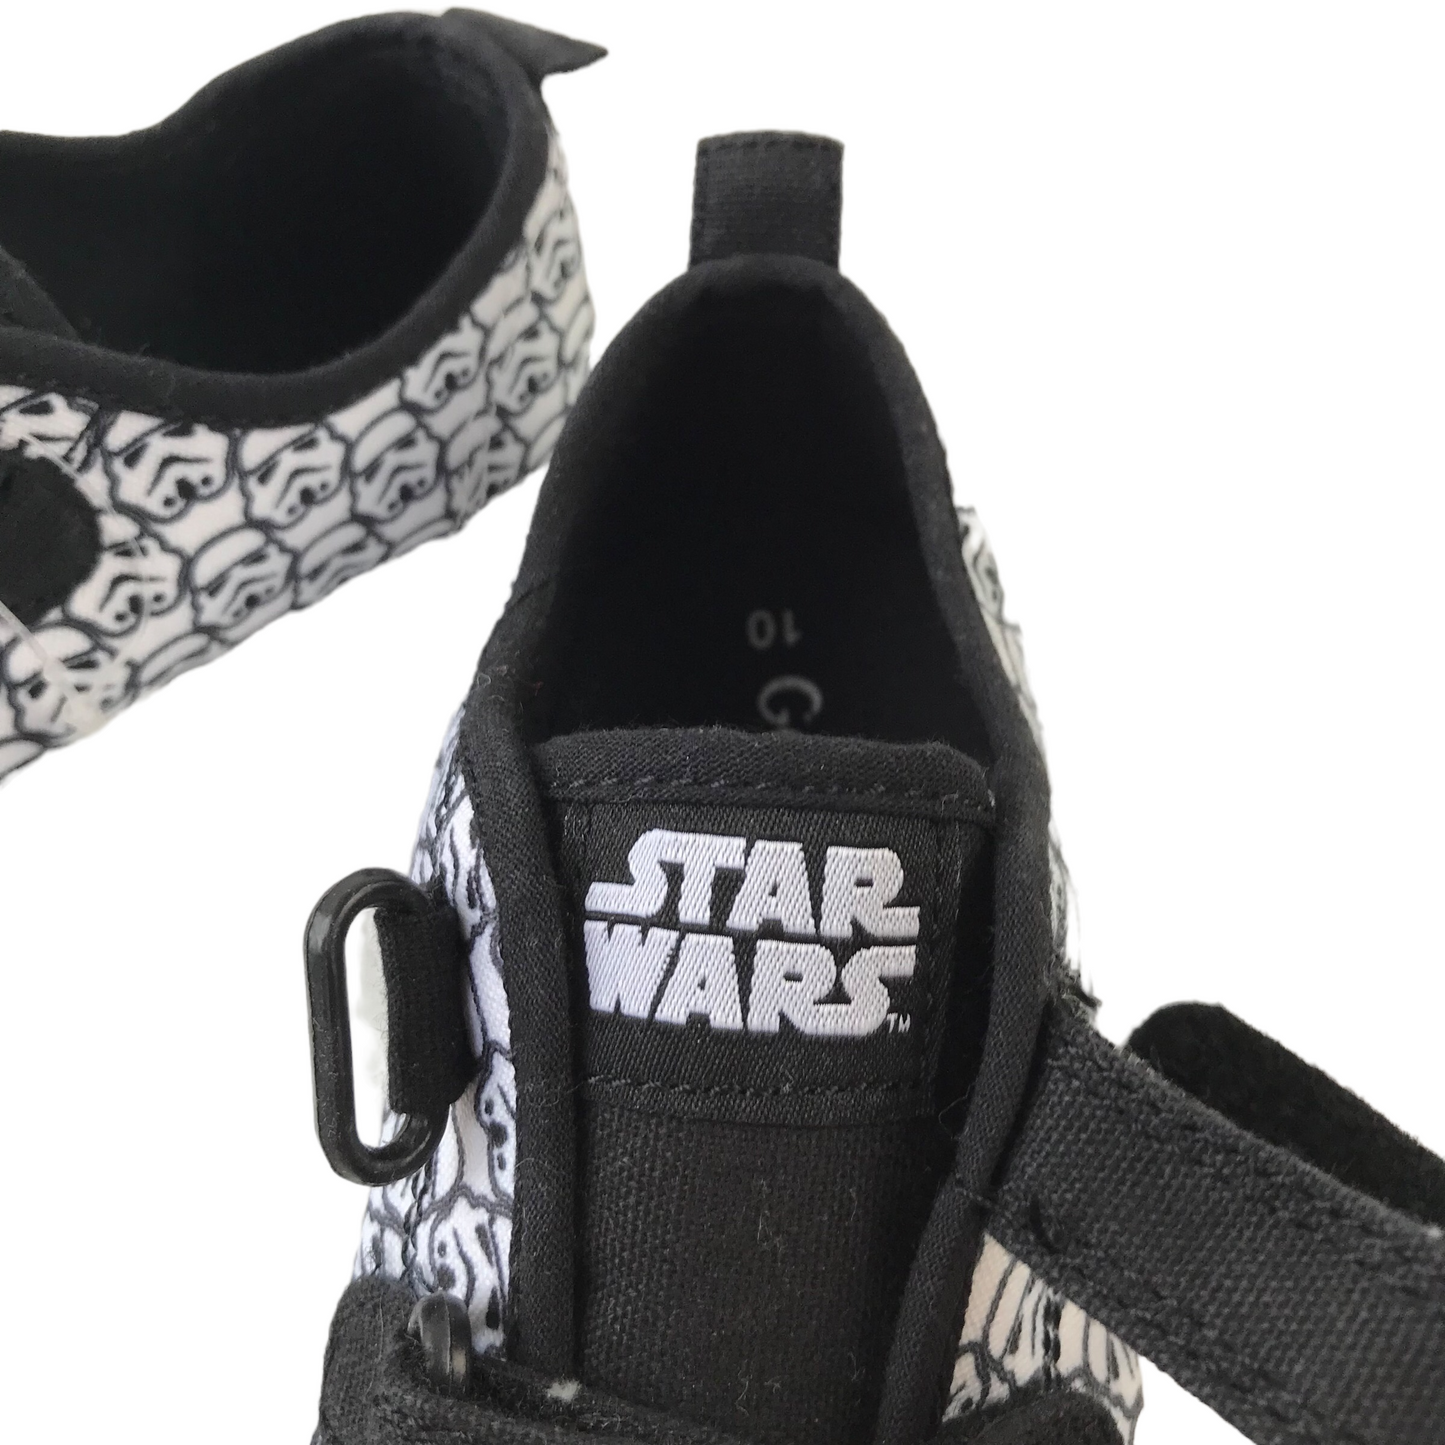 George Black and White Star Wars Trainers Size UK 10 junior